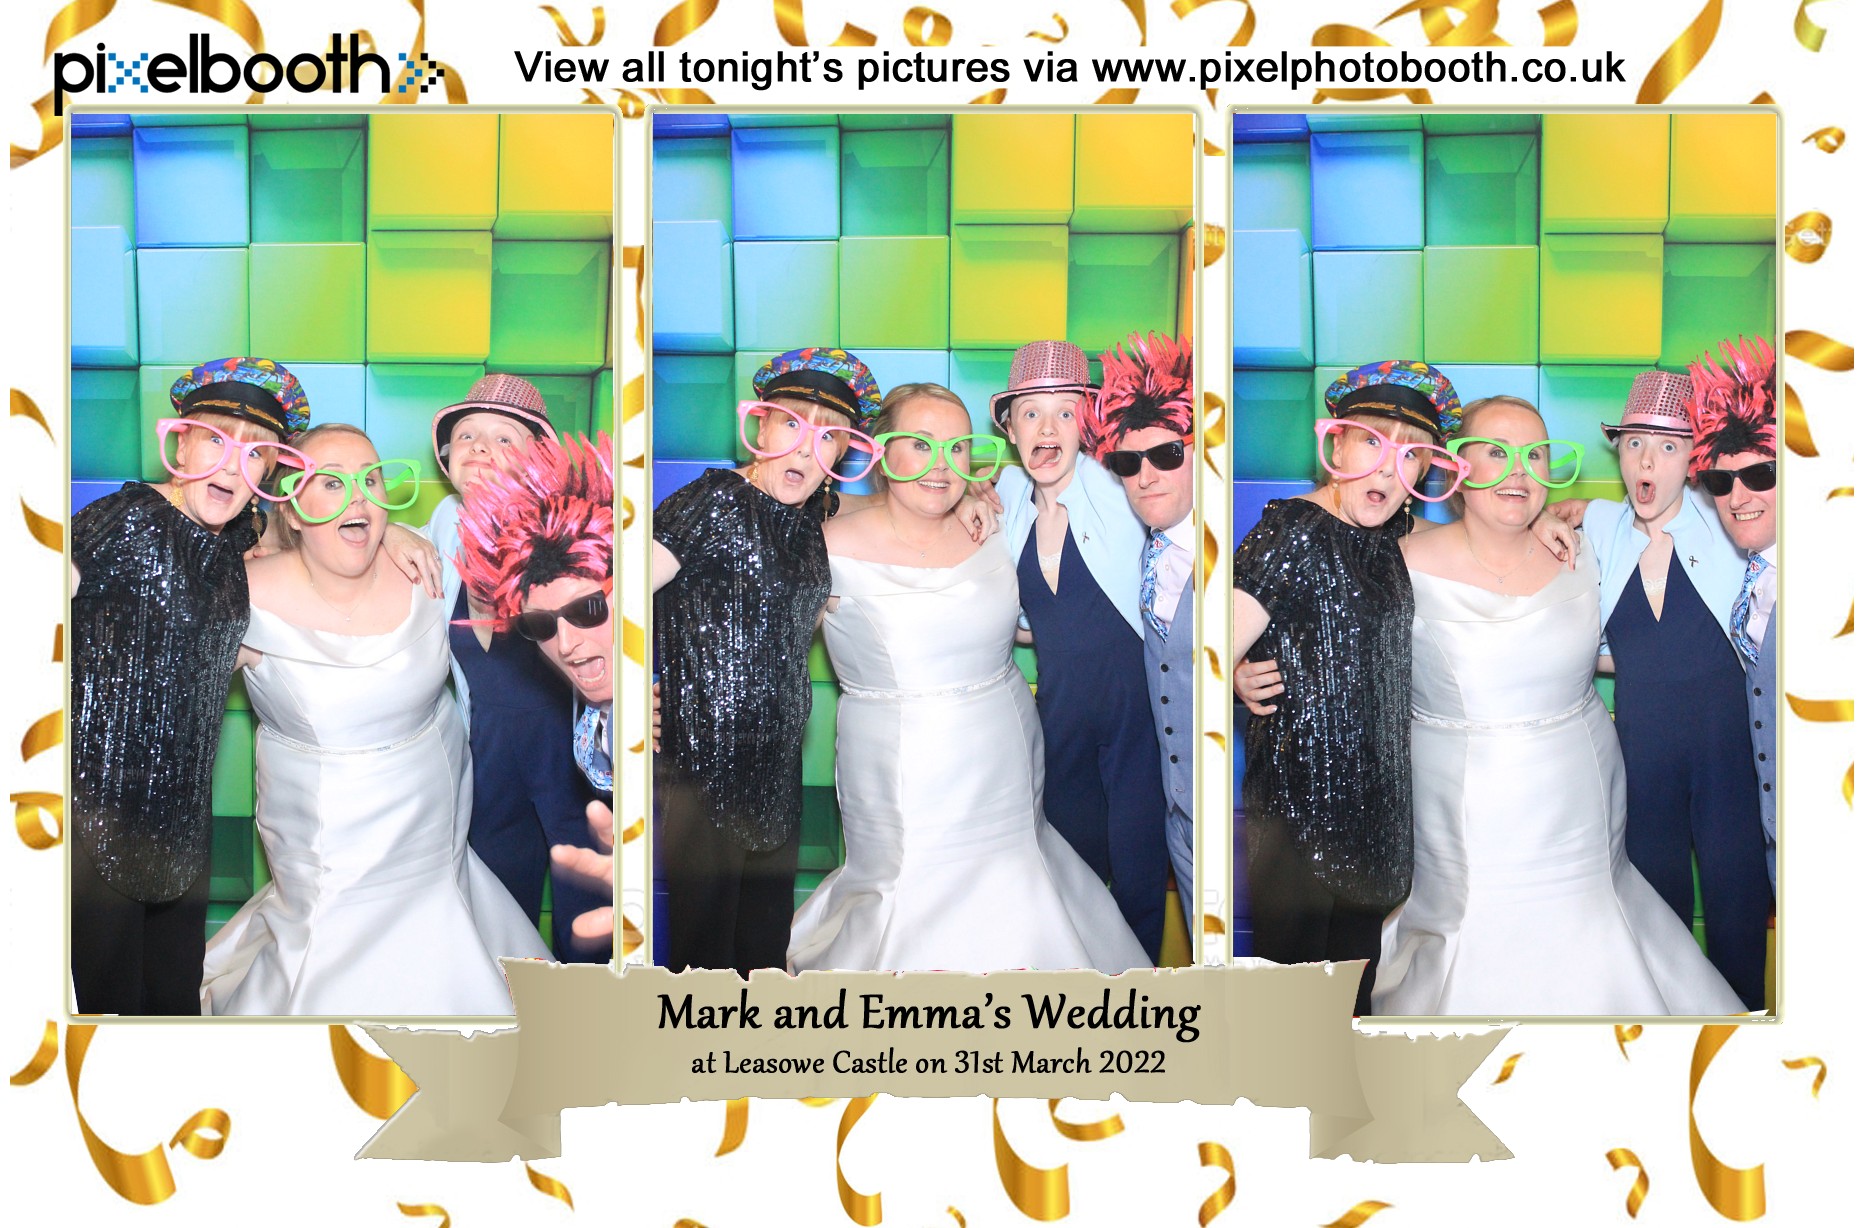 31st March 2022: Mark and Emma's Wedding at Leasowe Castle